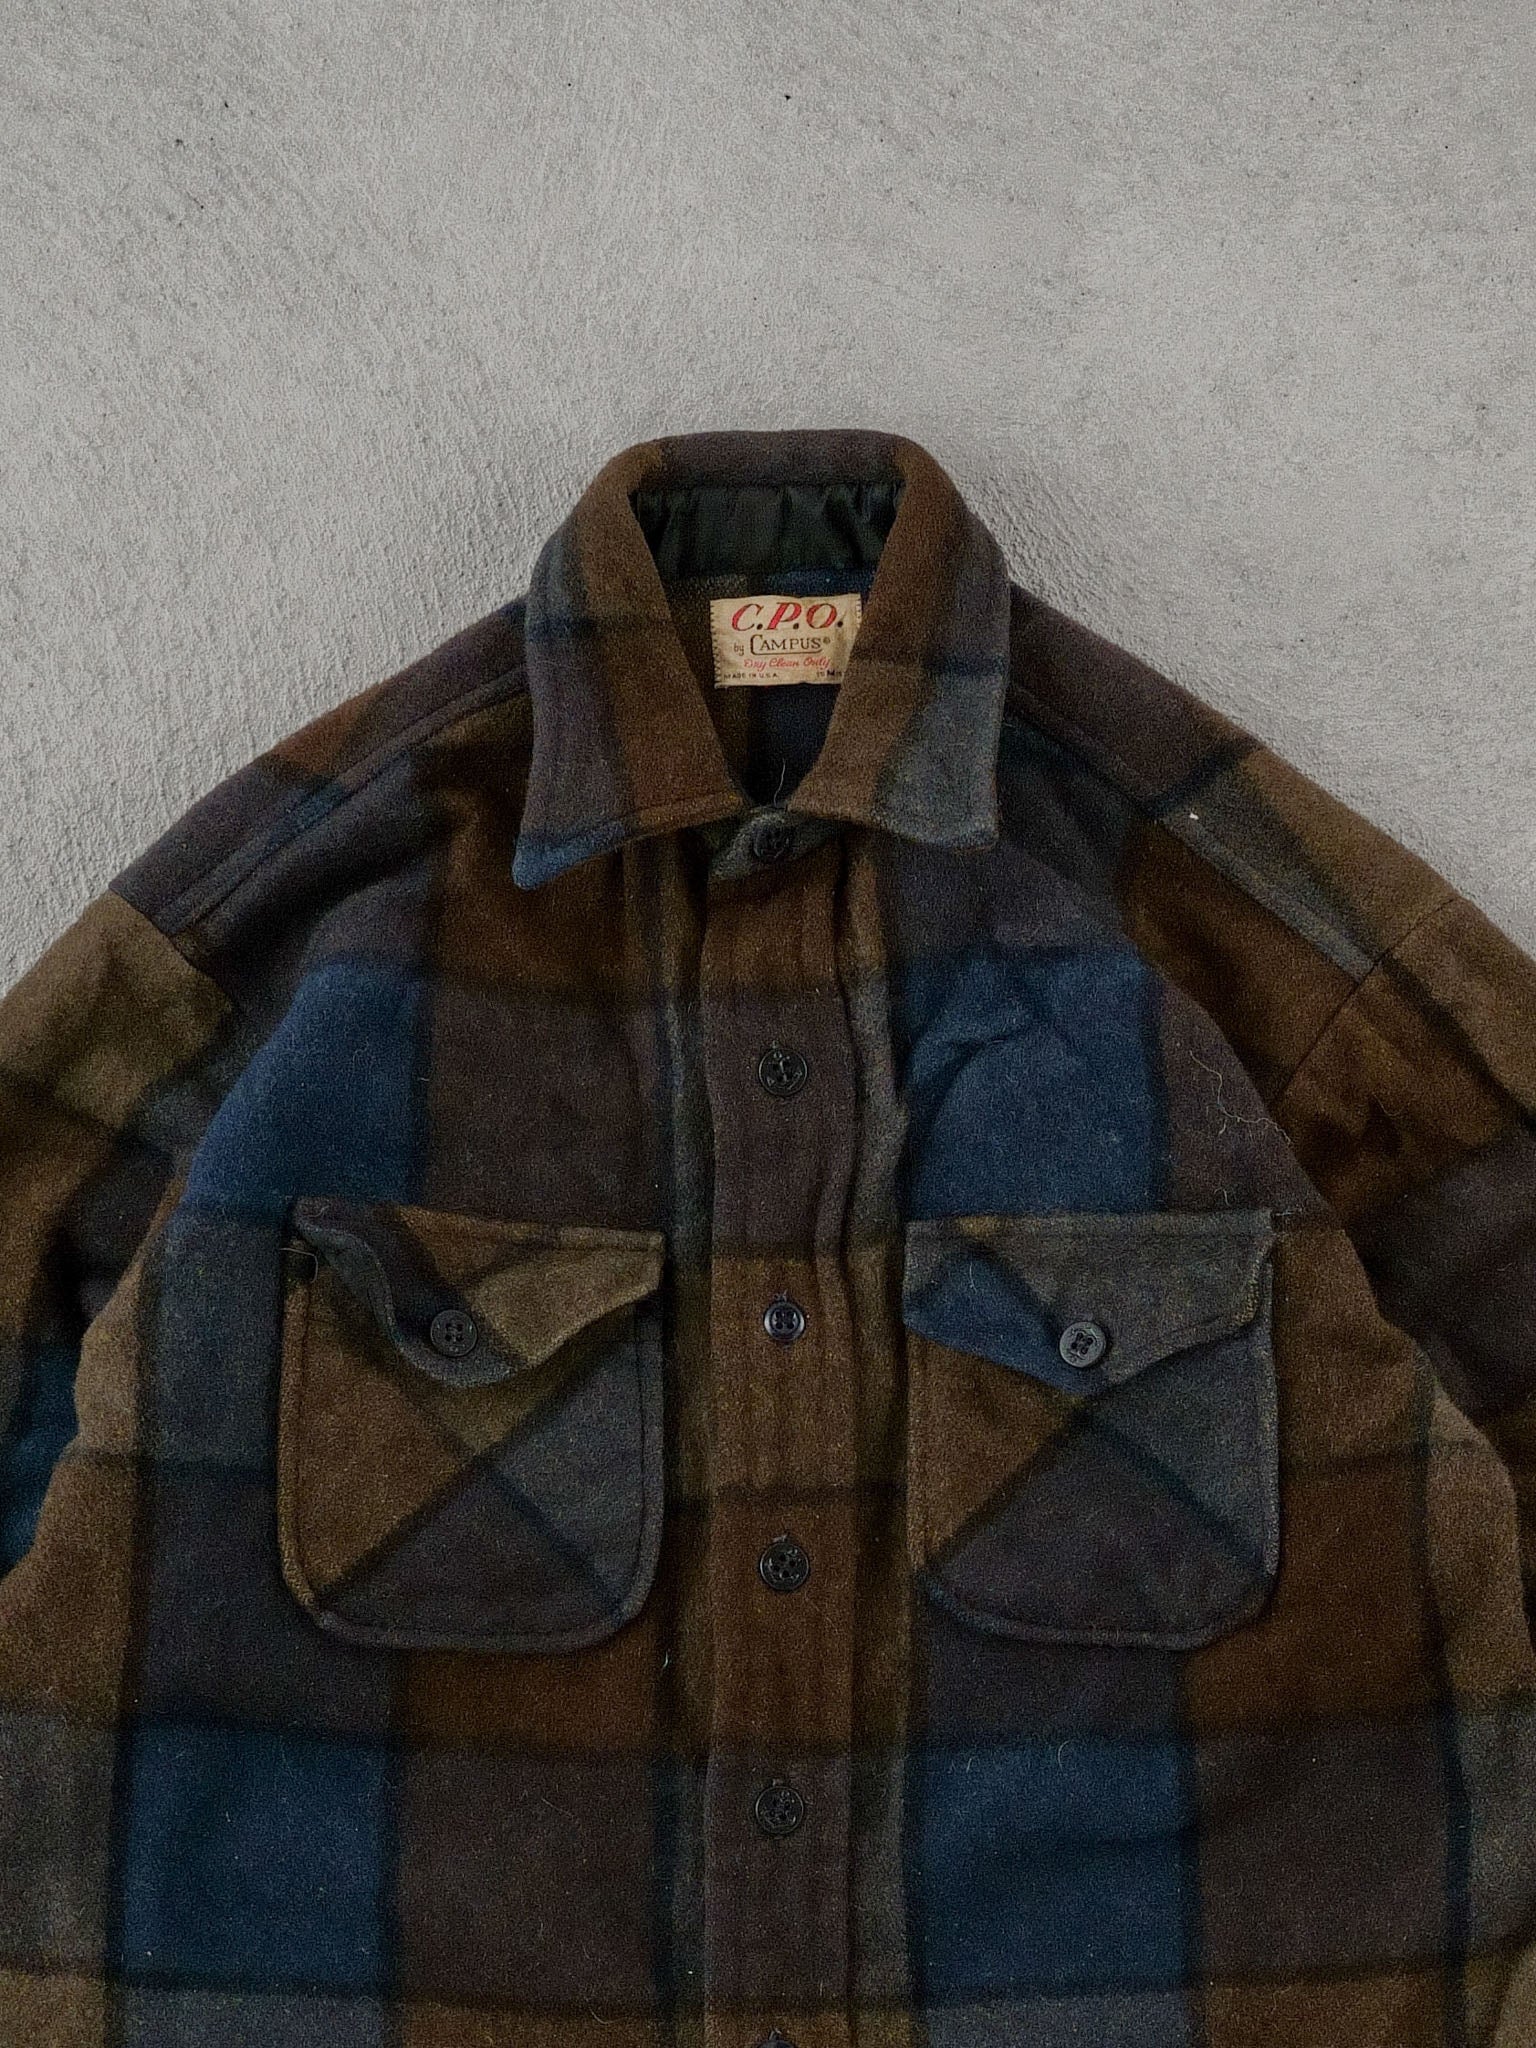 Vintage 90s Brown and Blue Plaid Collared Button Up (M)